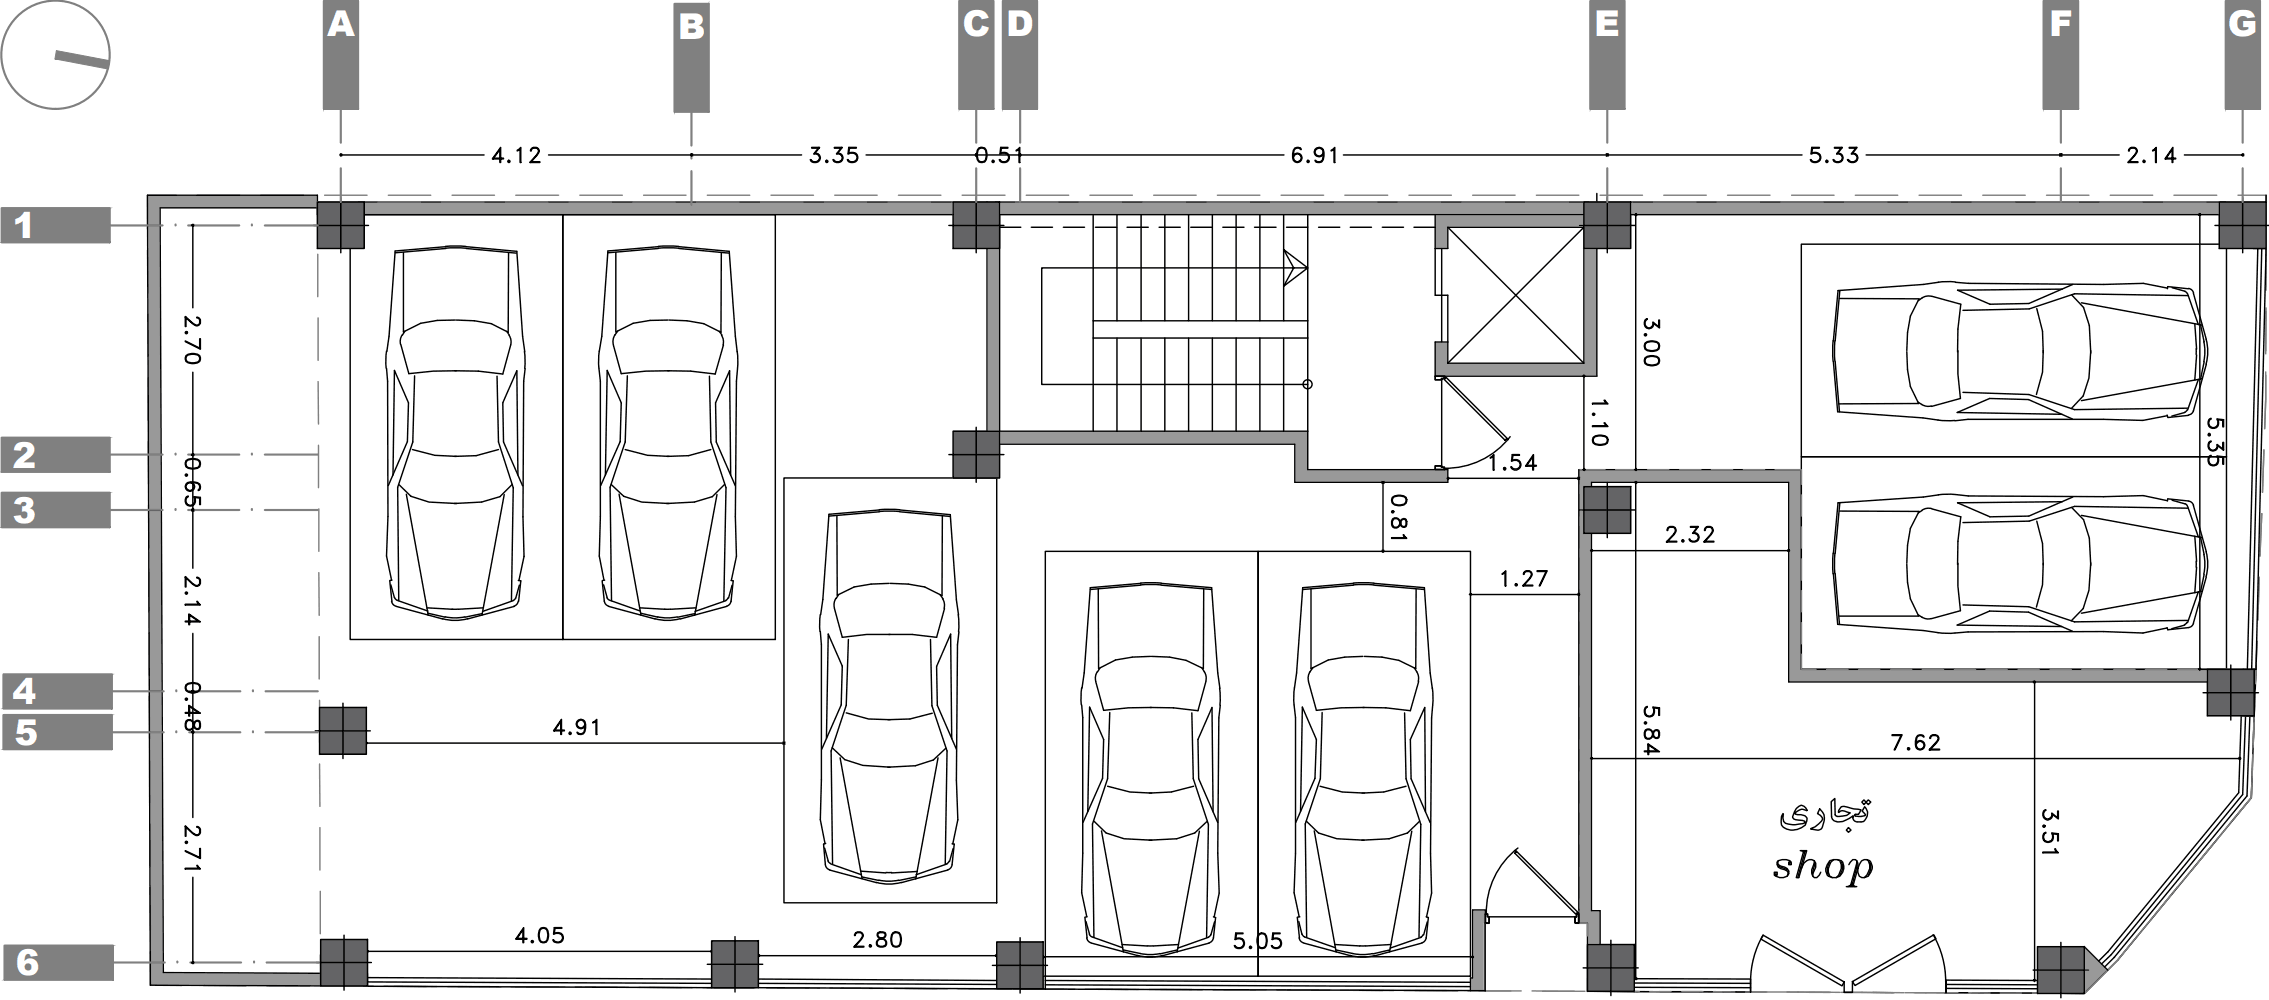 ground floor plan, an apartment in Gholipoor st.